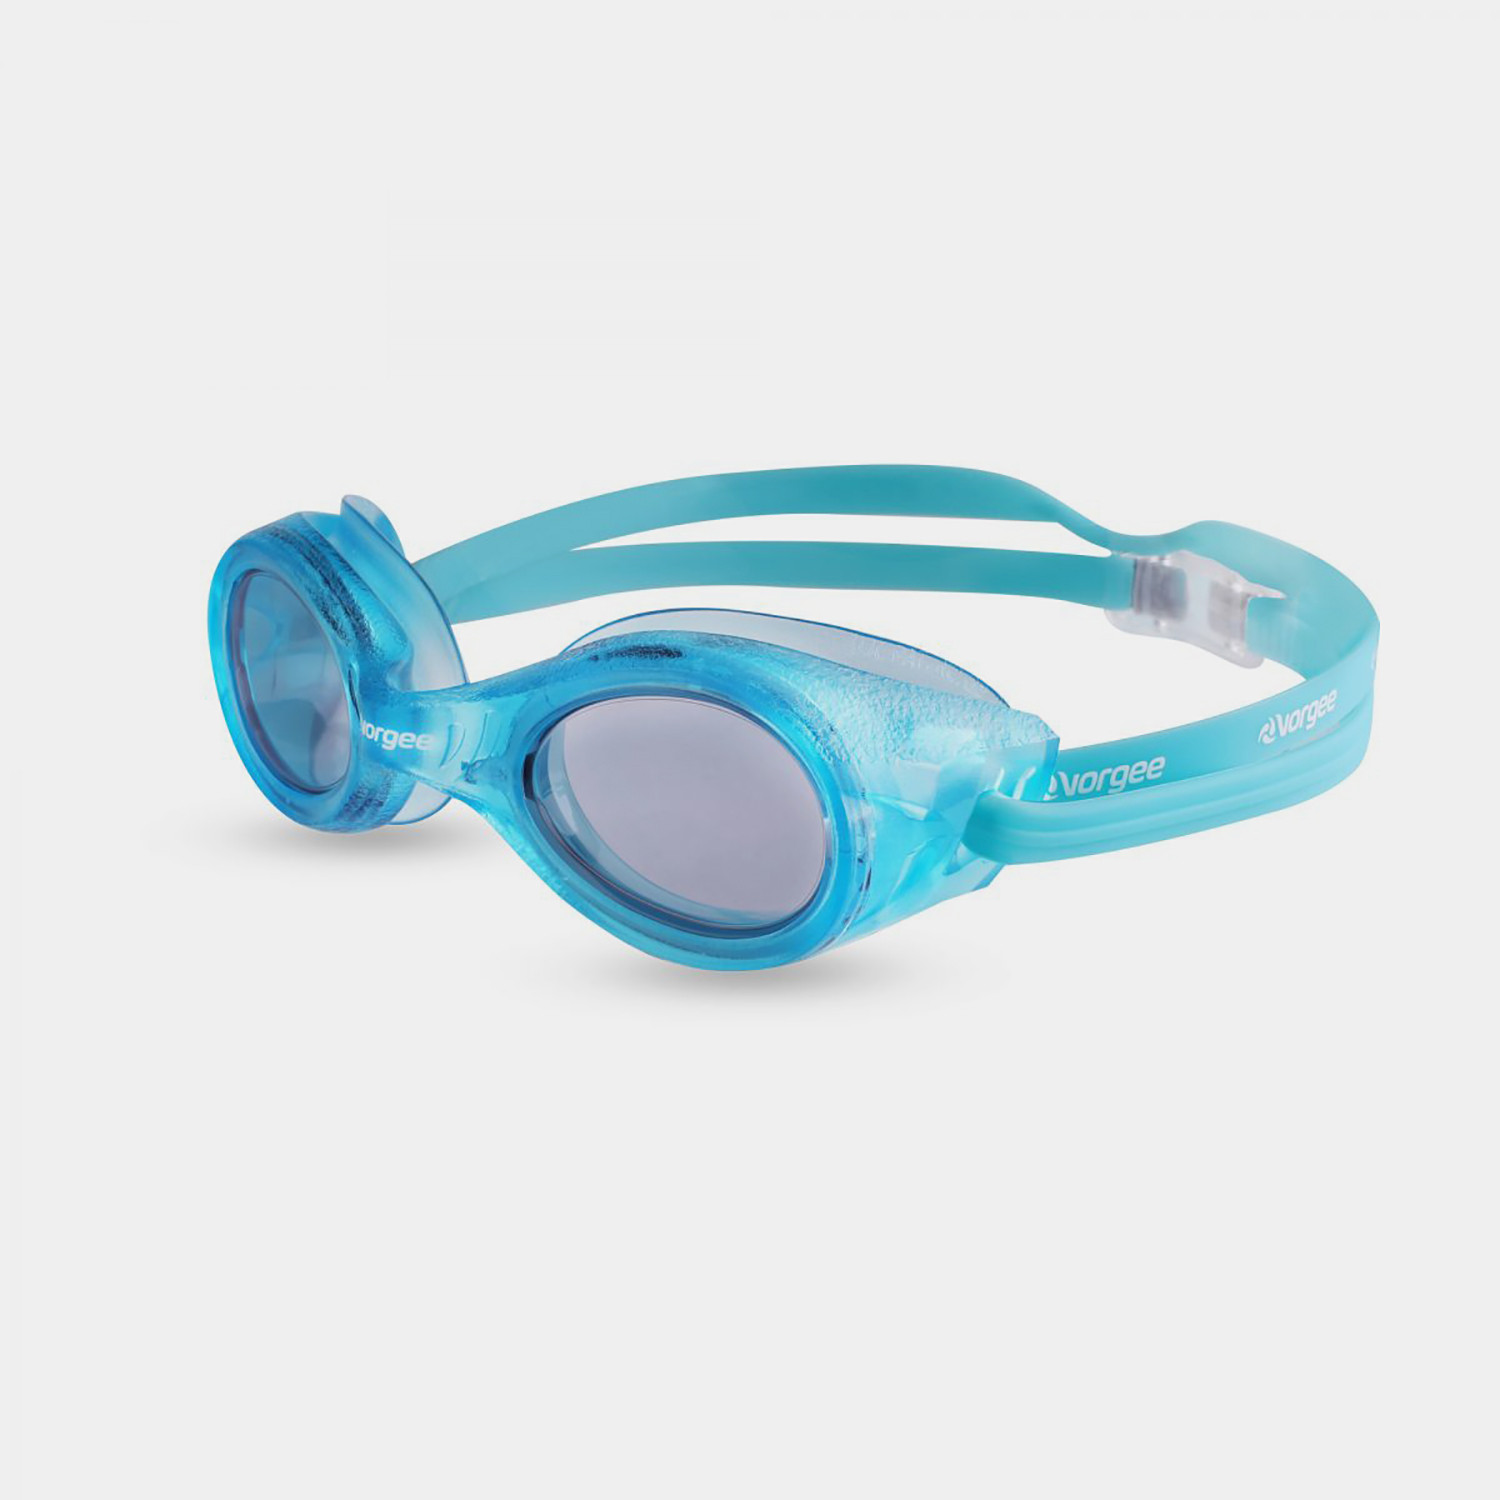 Vorgee Voyager Tinted Assorted Unisex Goggles (9000053559_745)